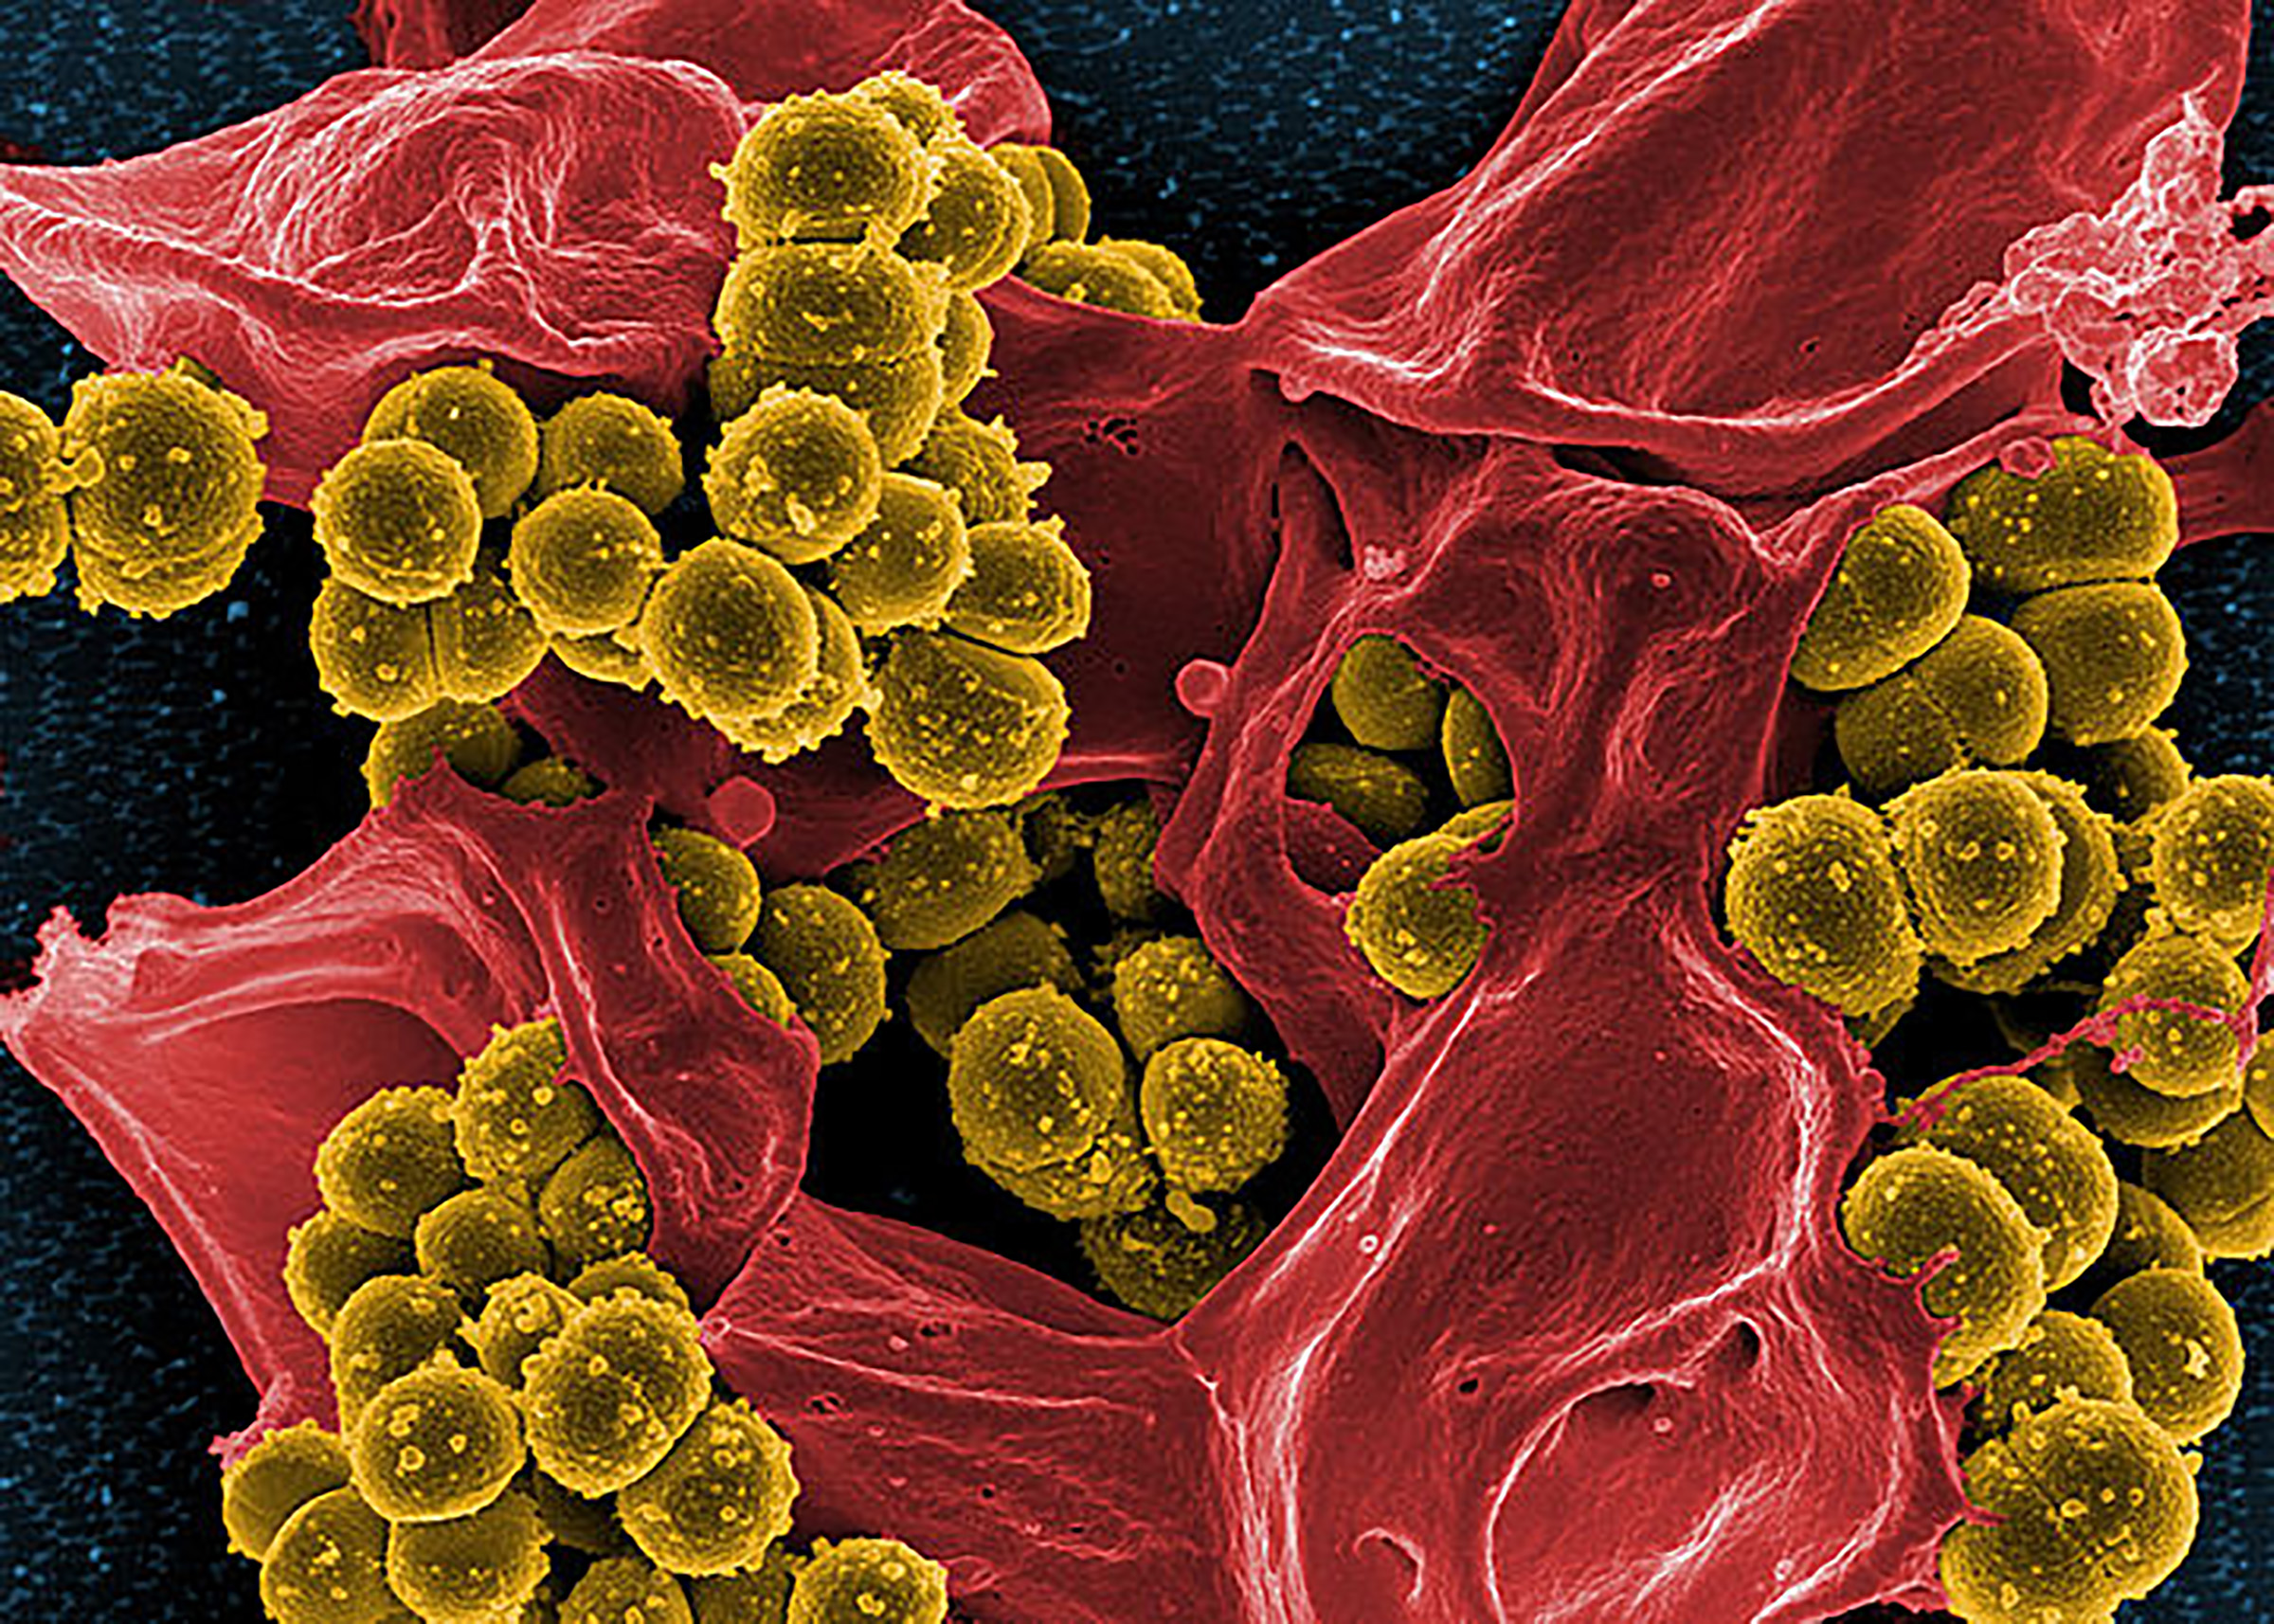 Scanning electron micrograph of Methicillin-resistant Staphylococcus aureus (MRSA) and a dead Human neutrophil.